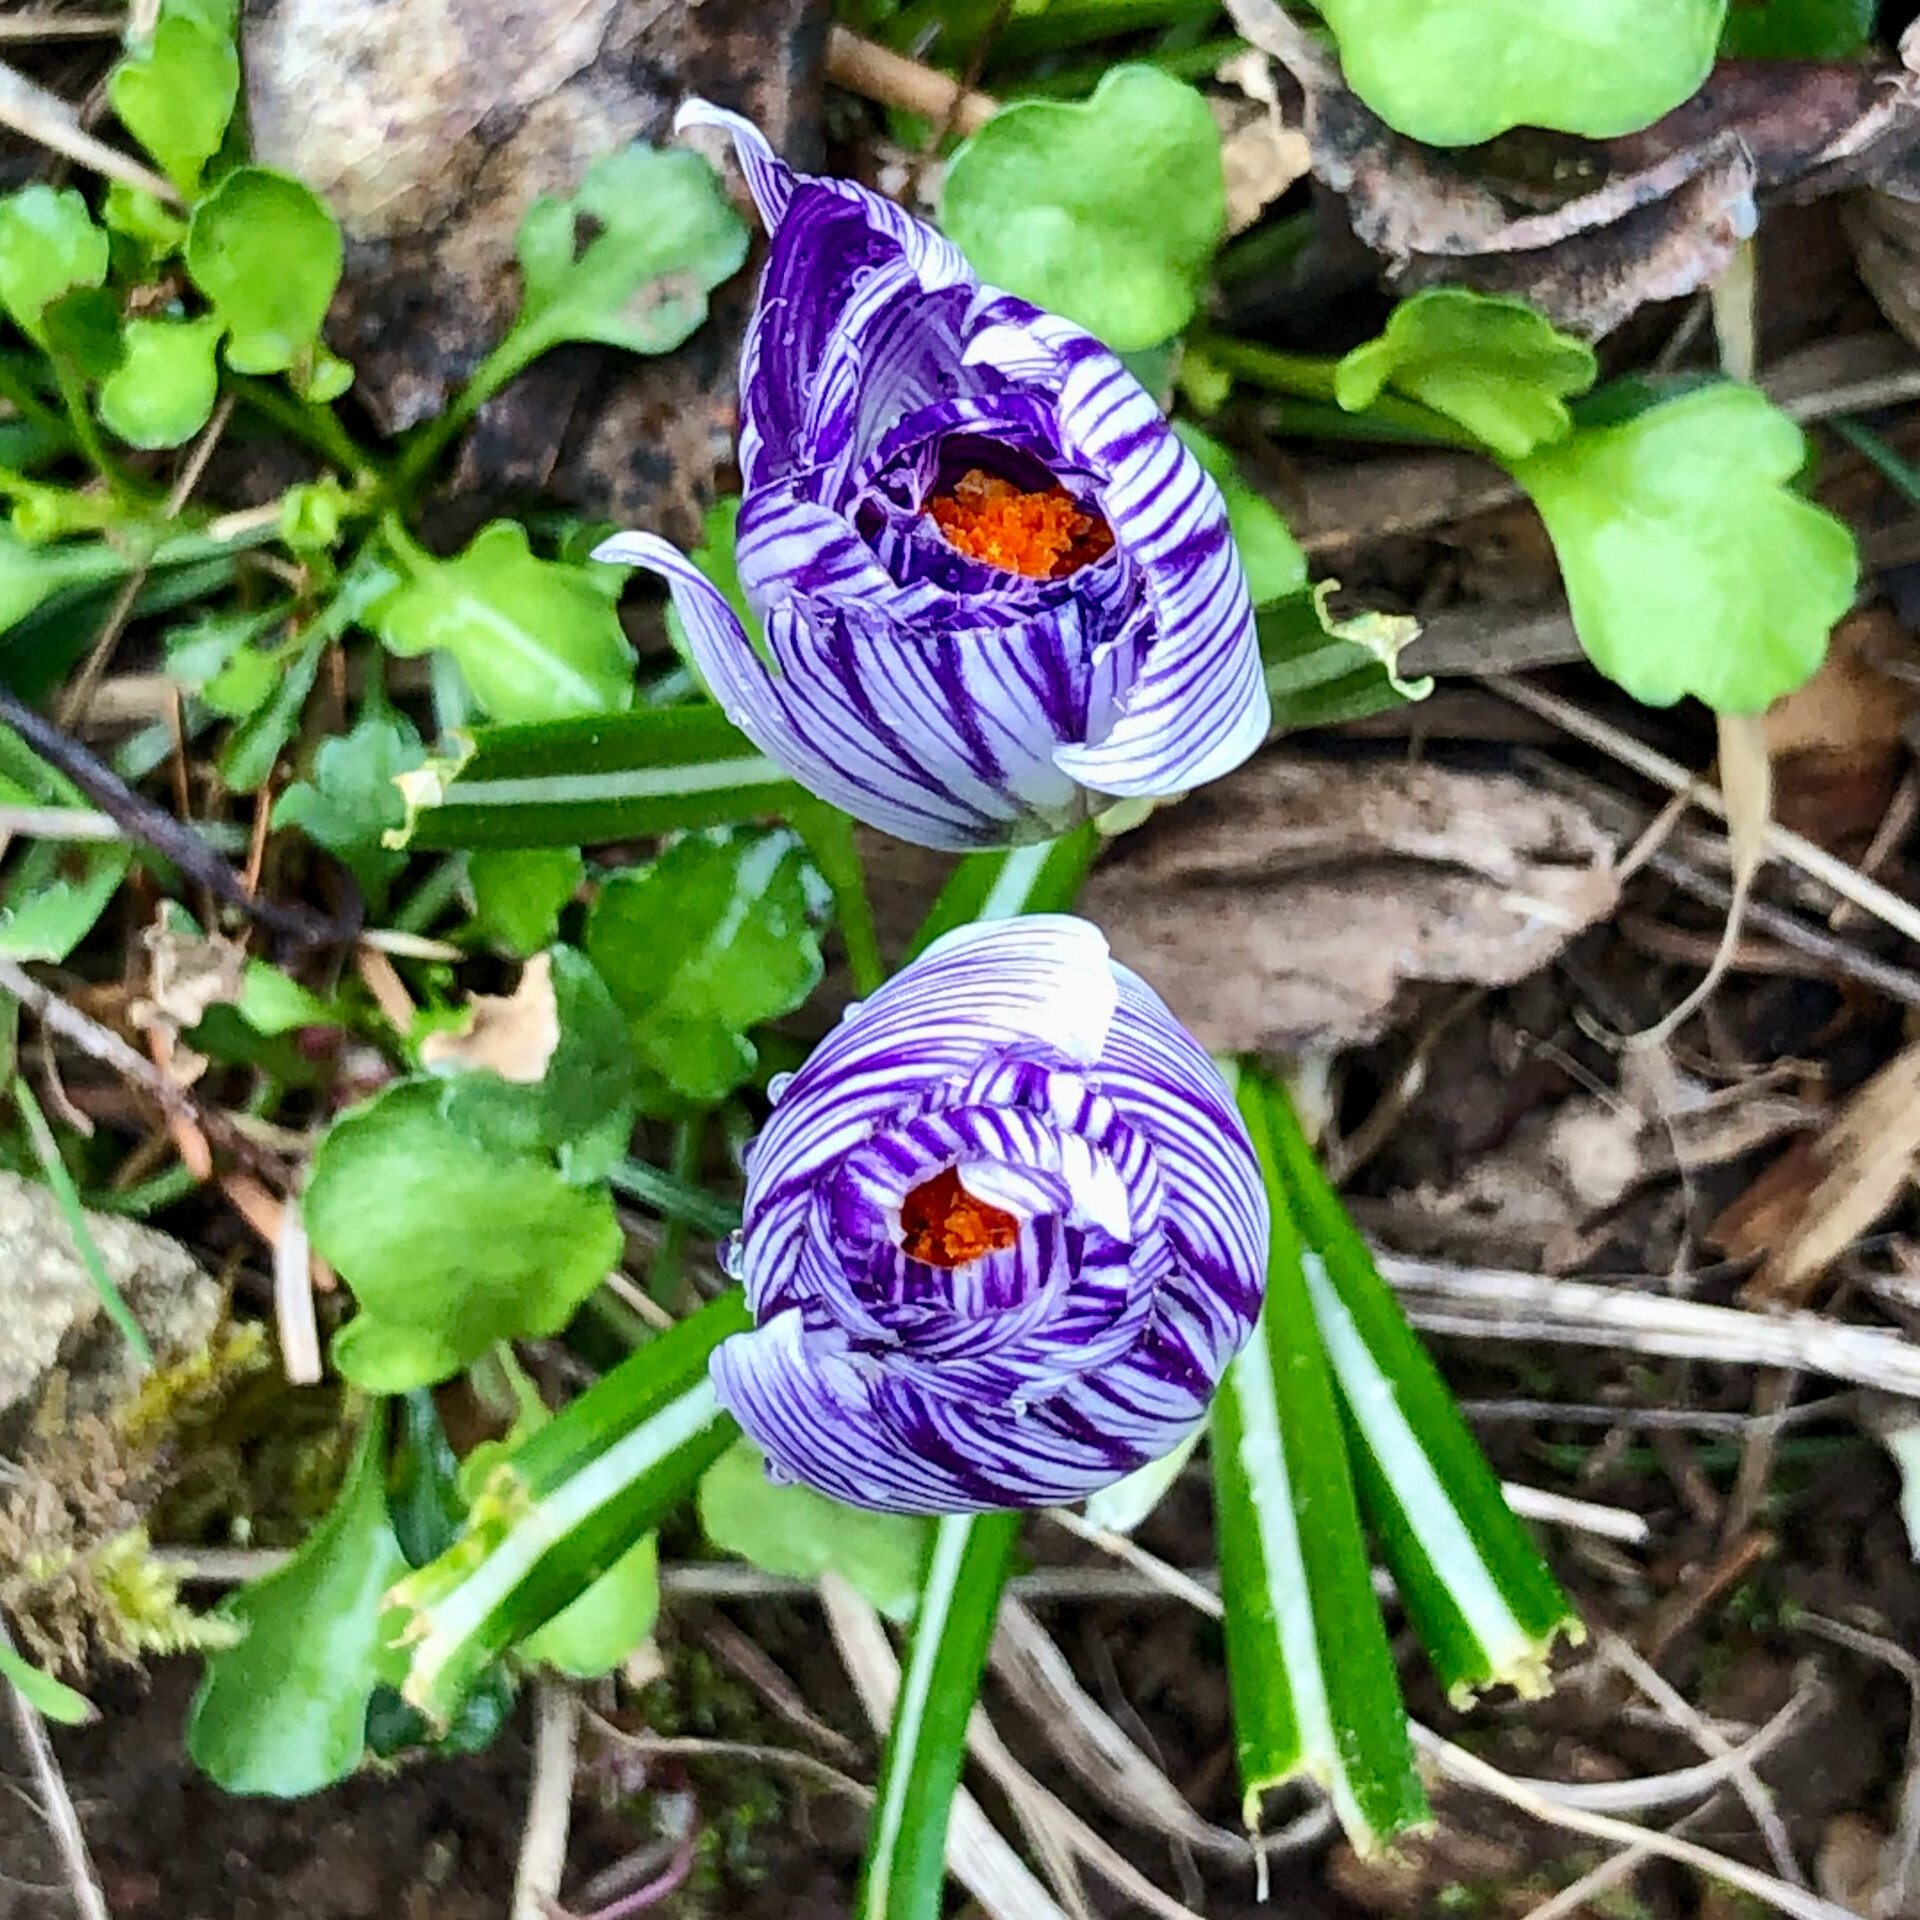  A couple of years back we planted some crocus bulbs. We missed them completely with the start of COVID last year, but are very pleased to see them this year. I love the colours in these. 